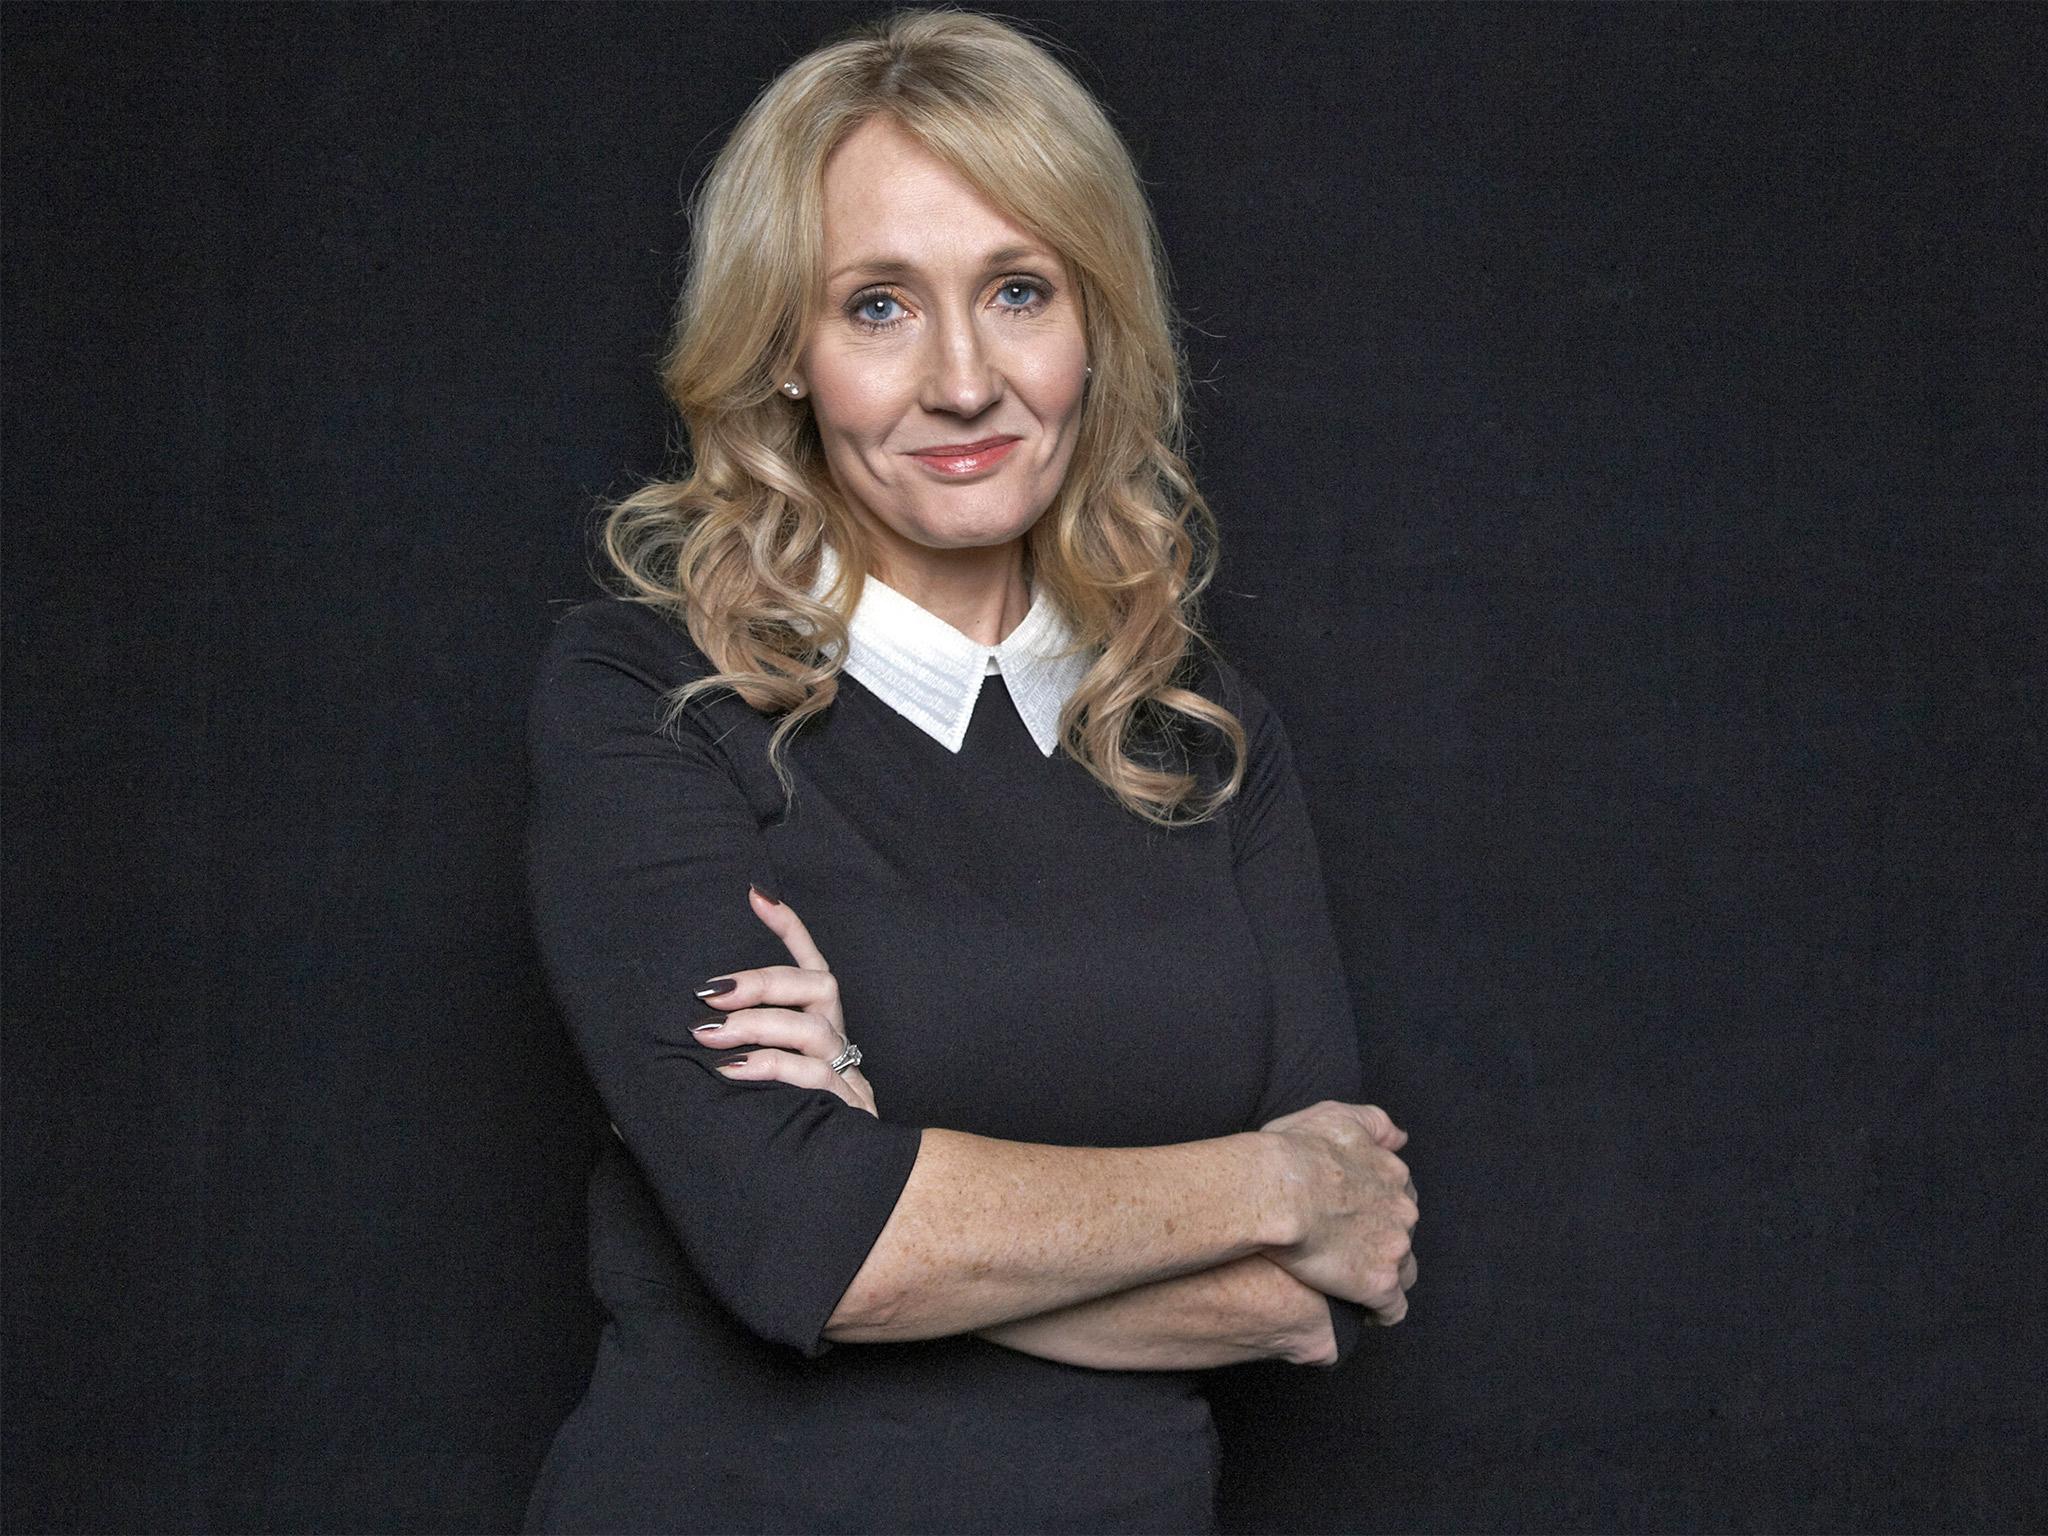 JK Rowling has given away over £100m to charity, including her own Volant Charitable Trust, which targets social deprivation as well as disaster relief and multiple sclerosis research